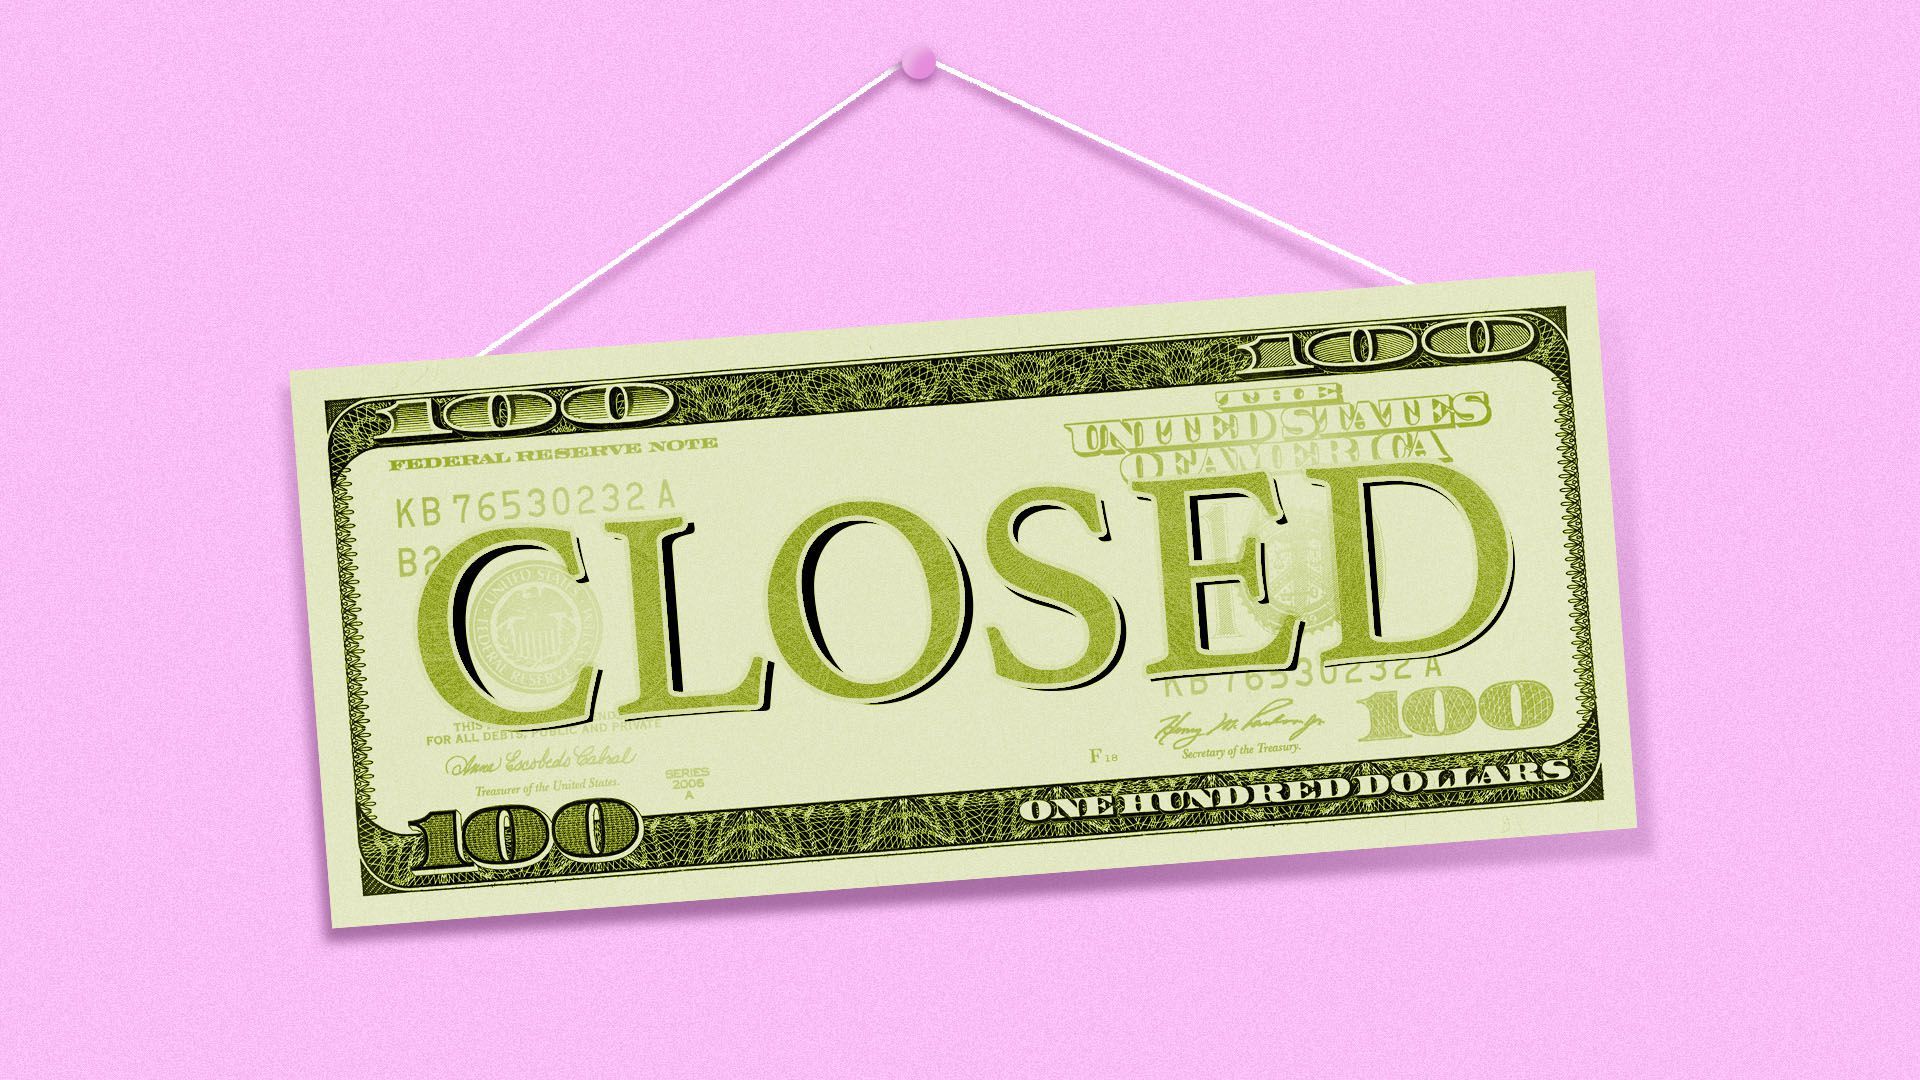 Illustration of a closed sign in the shape of a 100 dollar bill